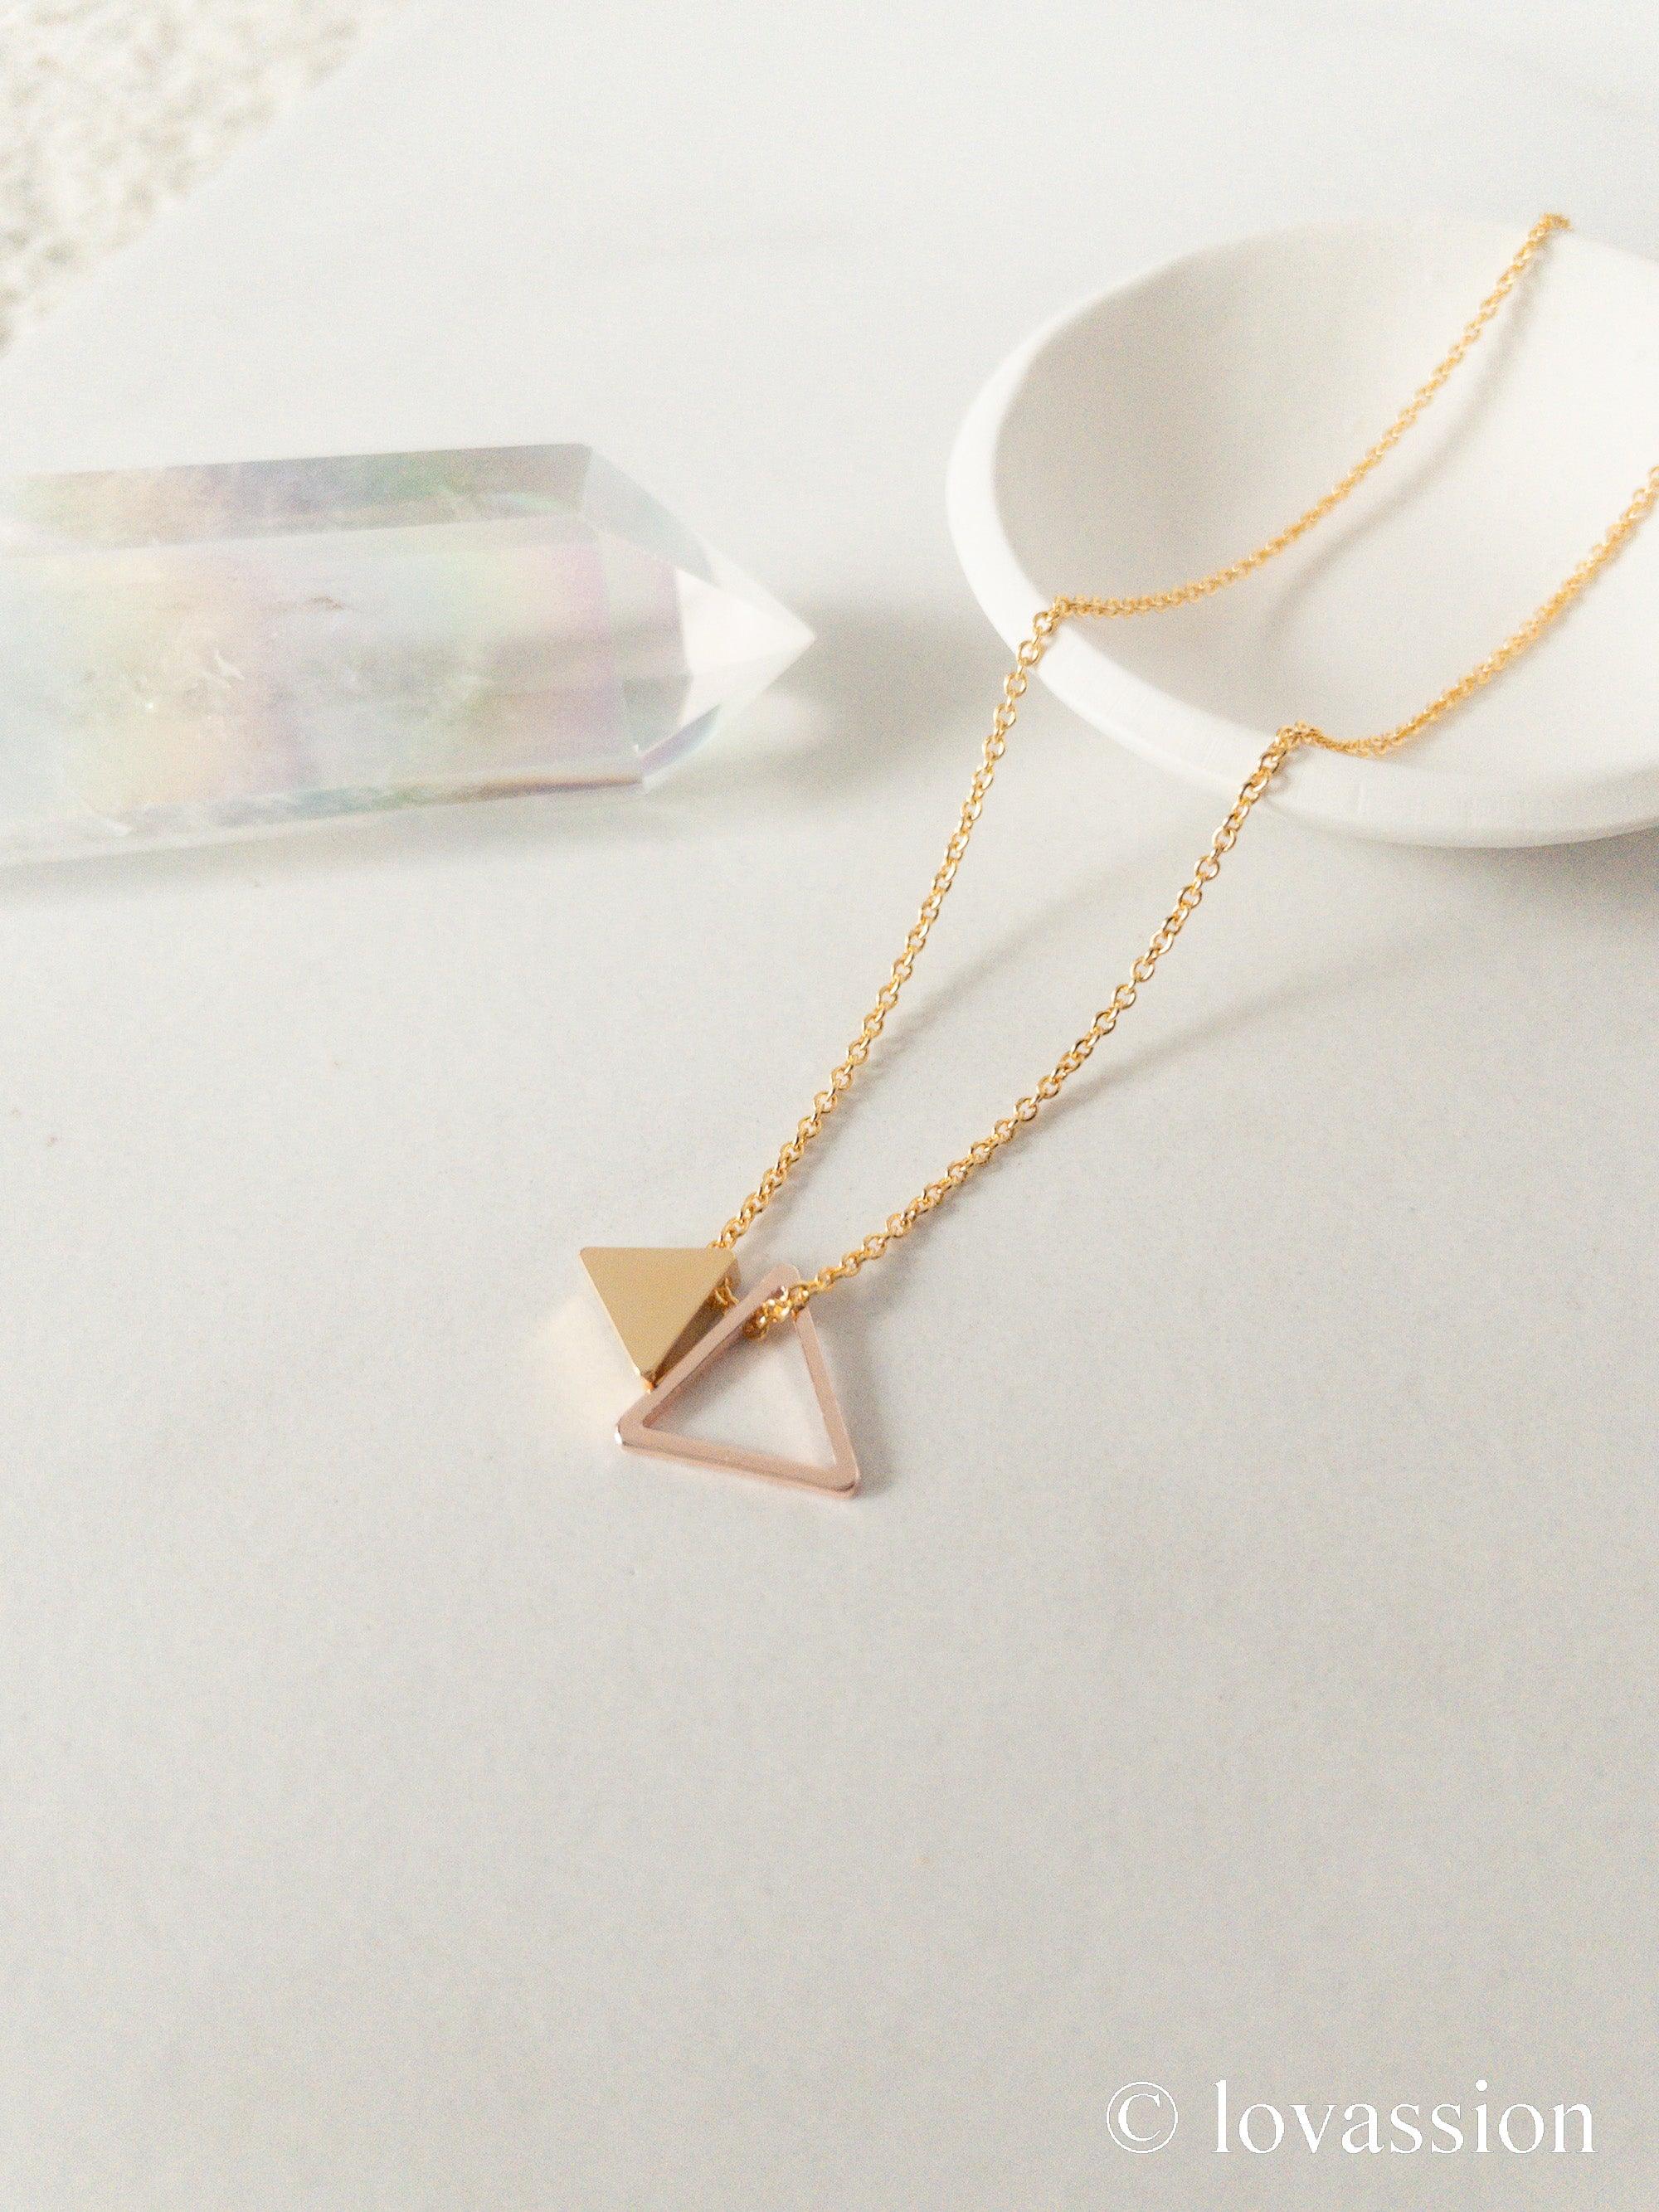 Buy AD Triangle pendant Rose Gold plated, Minimalist Chain pendant,  Handmade Jewelley gift for women at Amazon.in